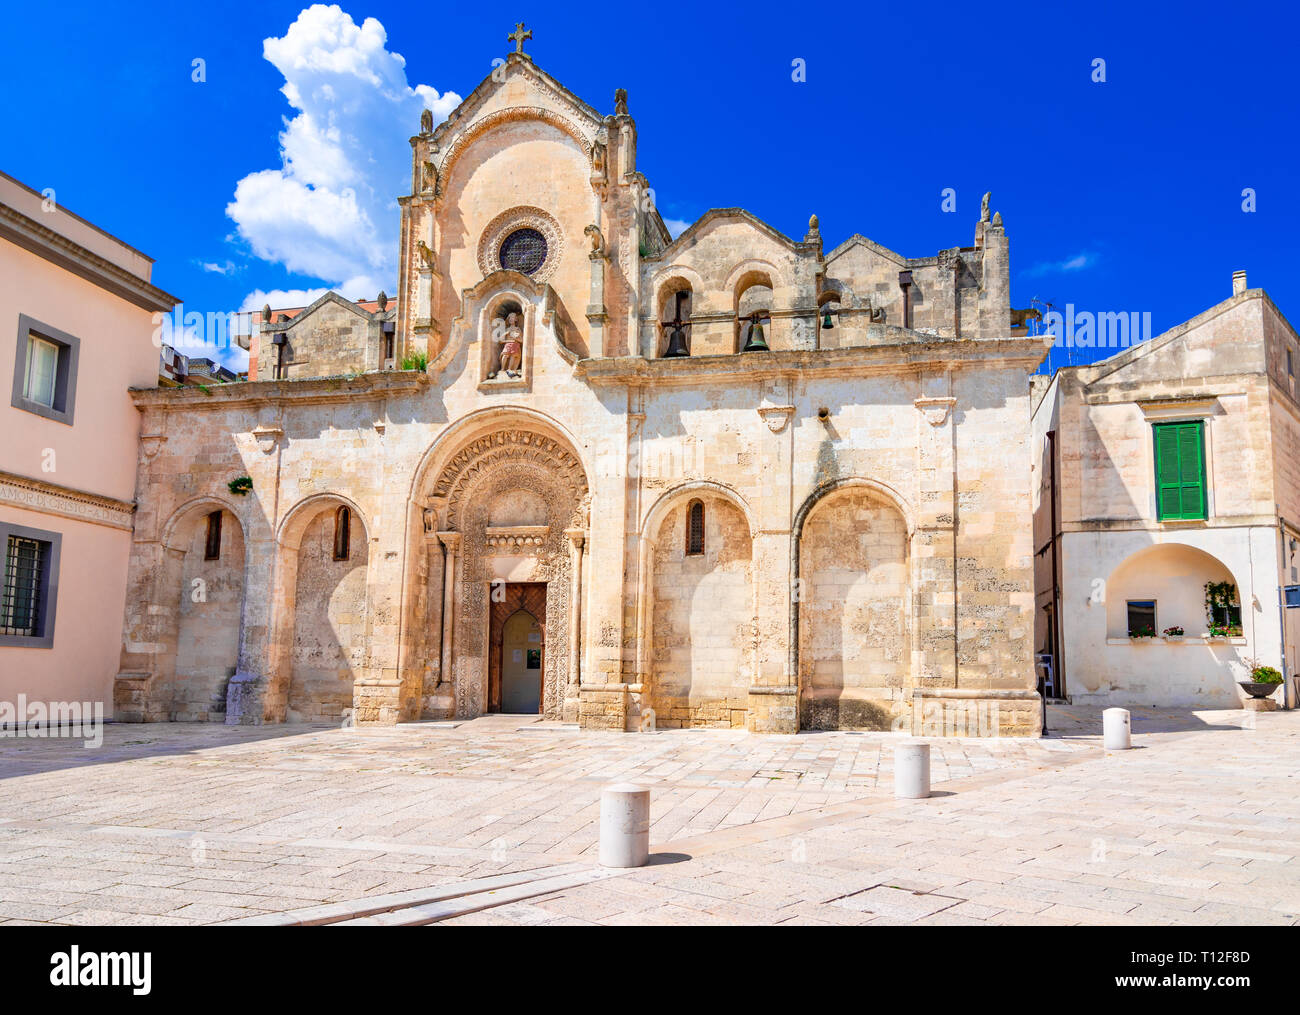 Matera, Basilicata, Italy: The medieval church of San Giovanni Battista or Saint John the Baptist, in the old town of the Unesco heritage city and Eur Stock Photo